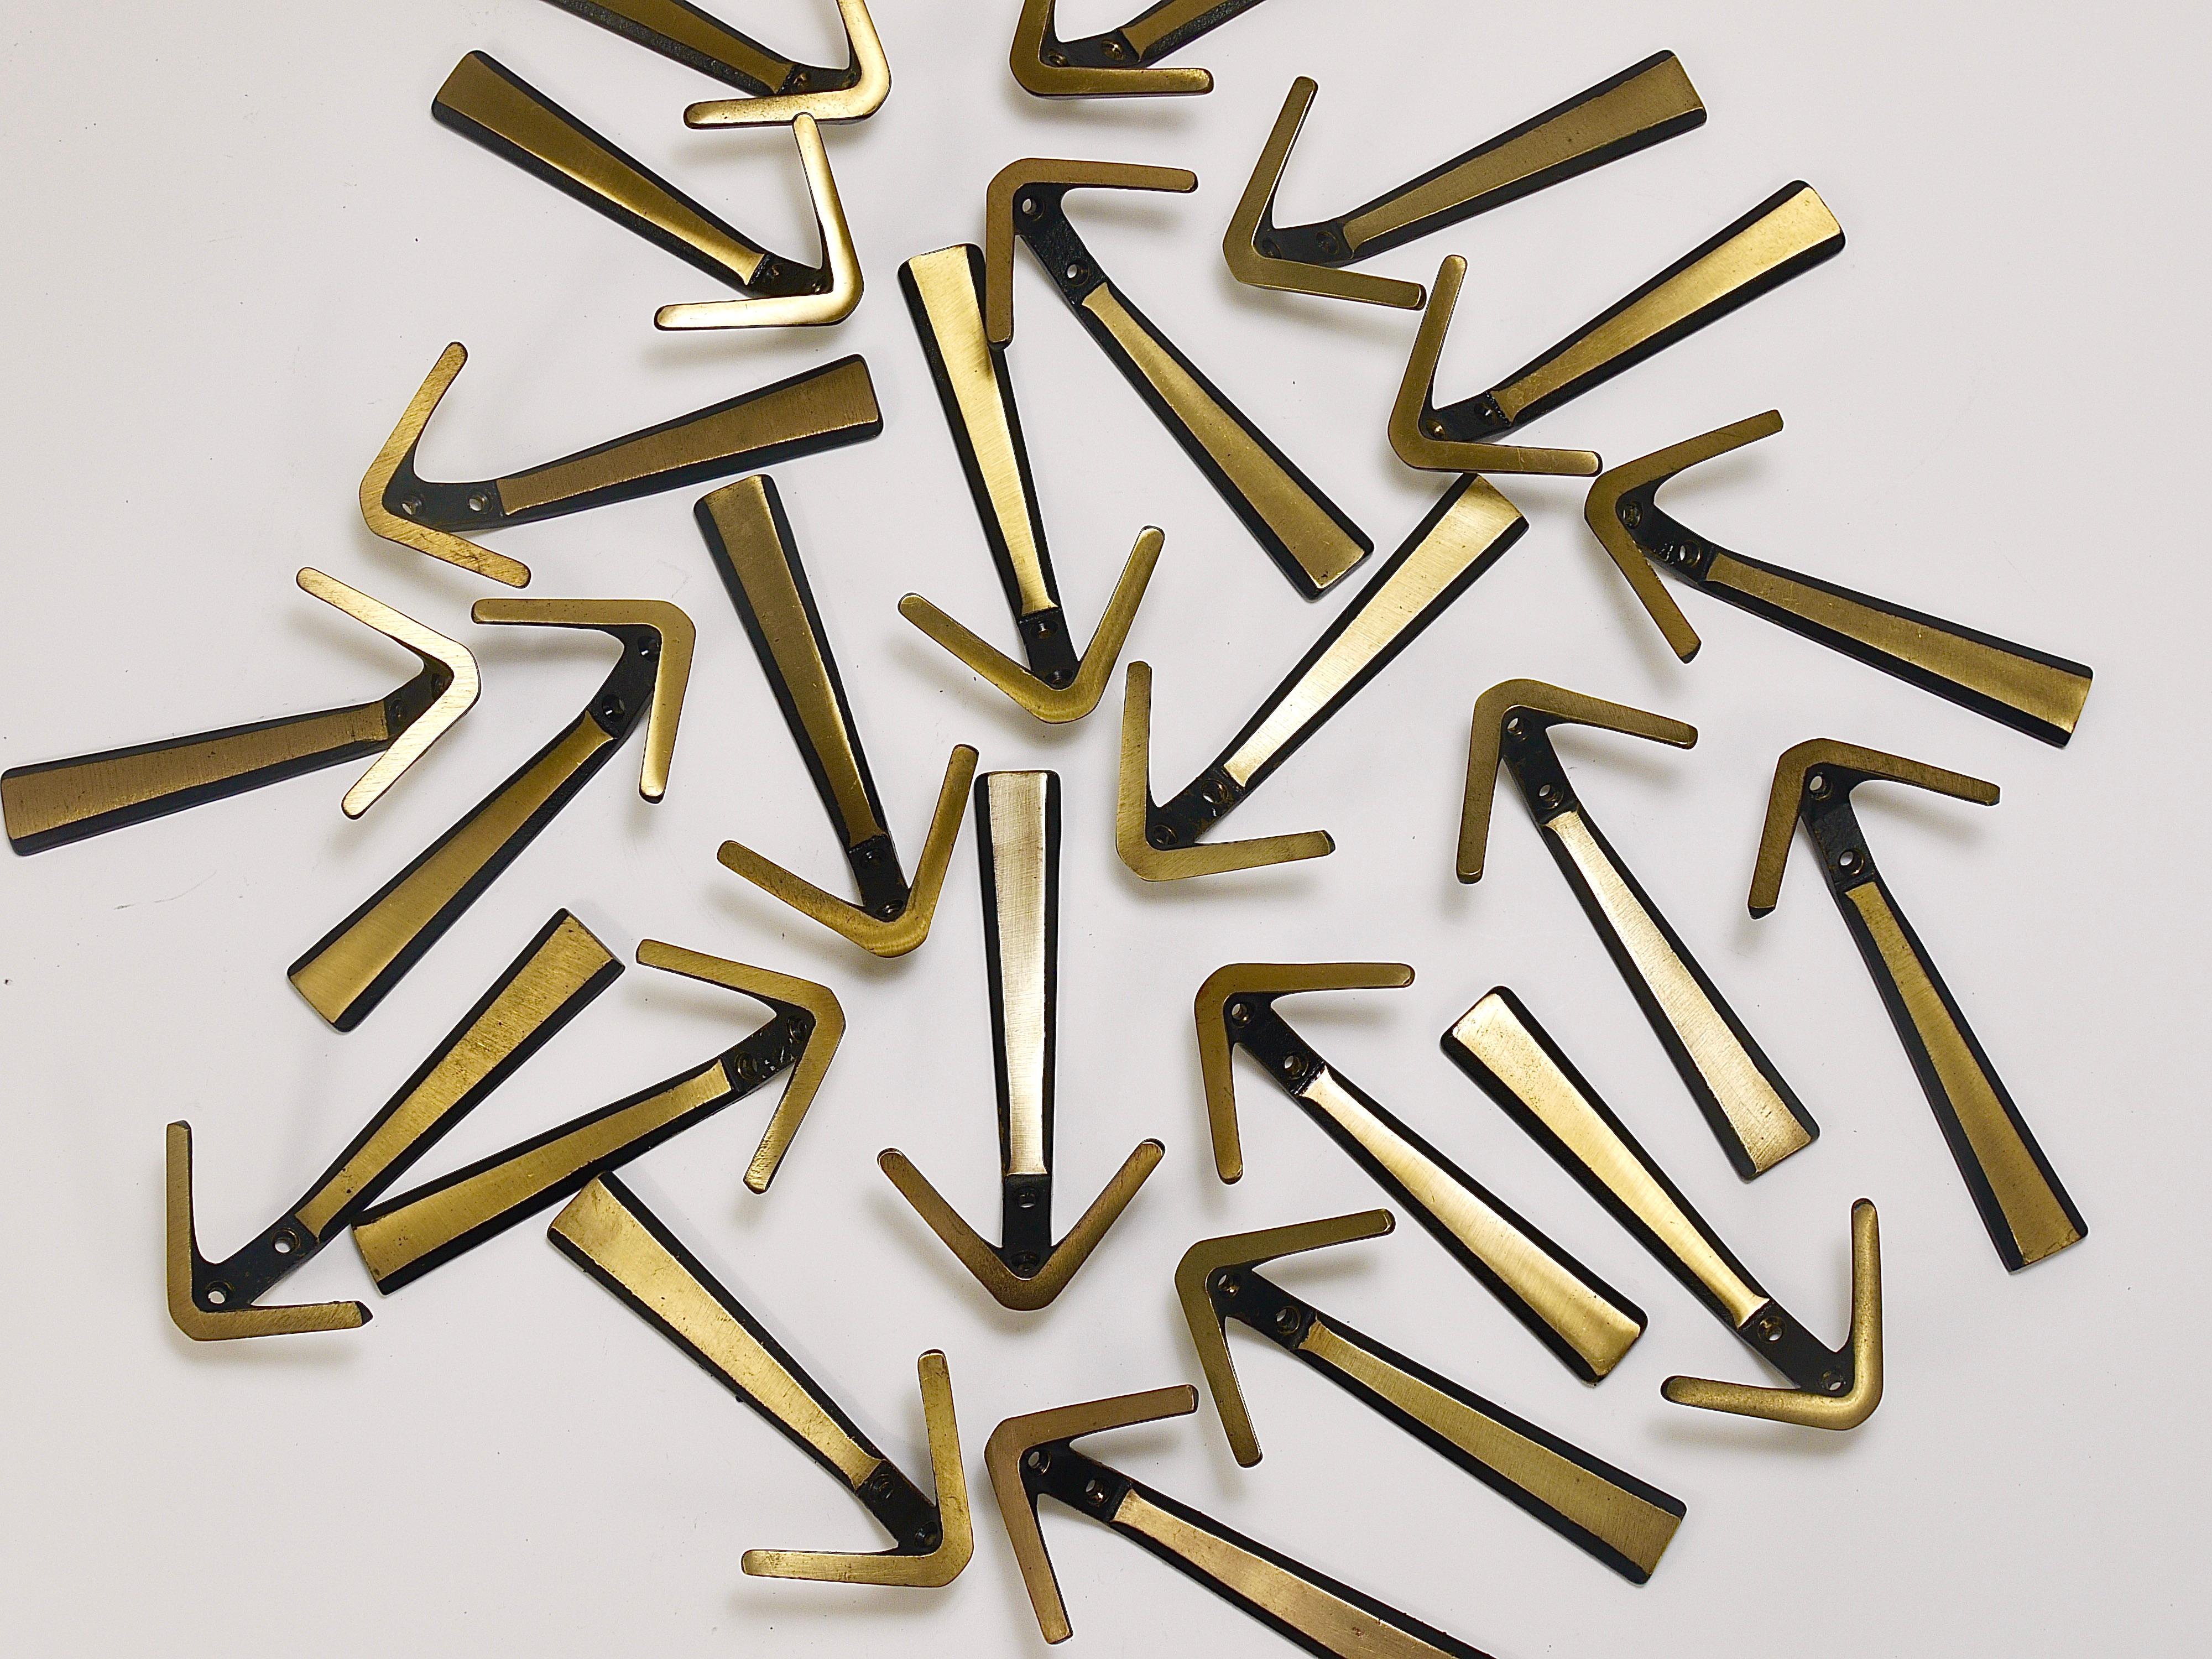 Up to 24 beautiful Austrian modernist V-shaped brass double wall hooks, manufactured in the 1950s by Hertha Baller in Vienna / Austria. Made of black finished and partly brushed brass, solid pieces in very good condition with marginal patina. We